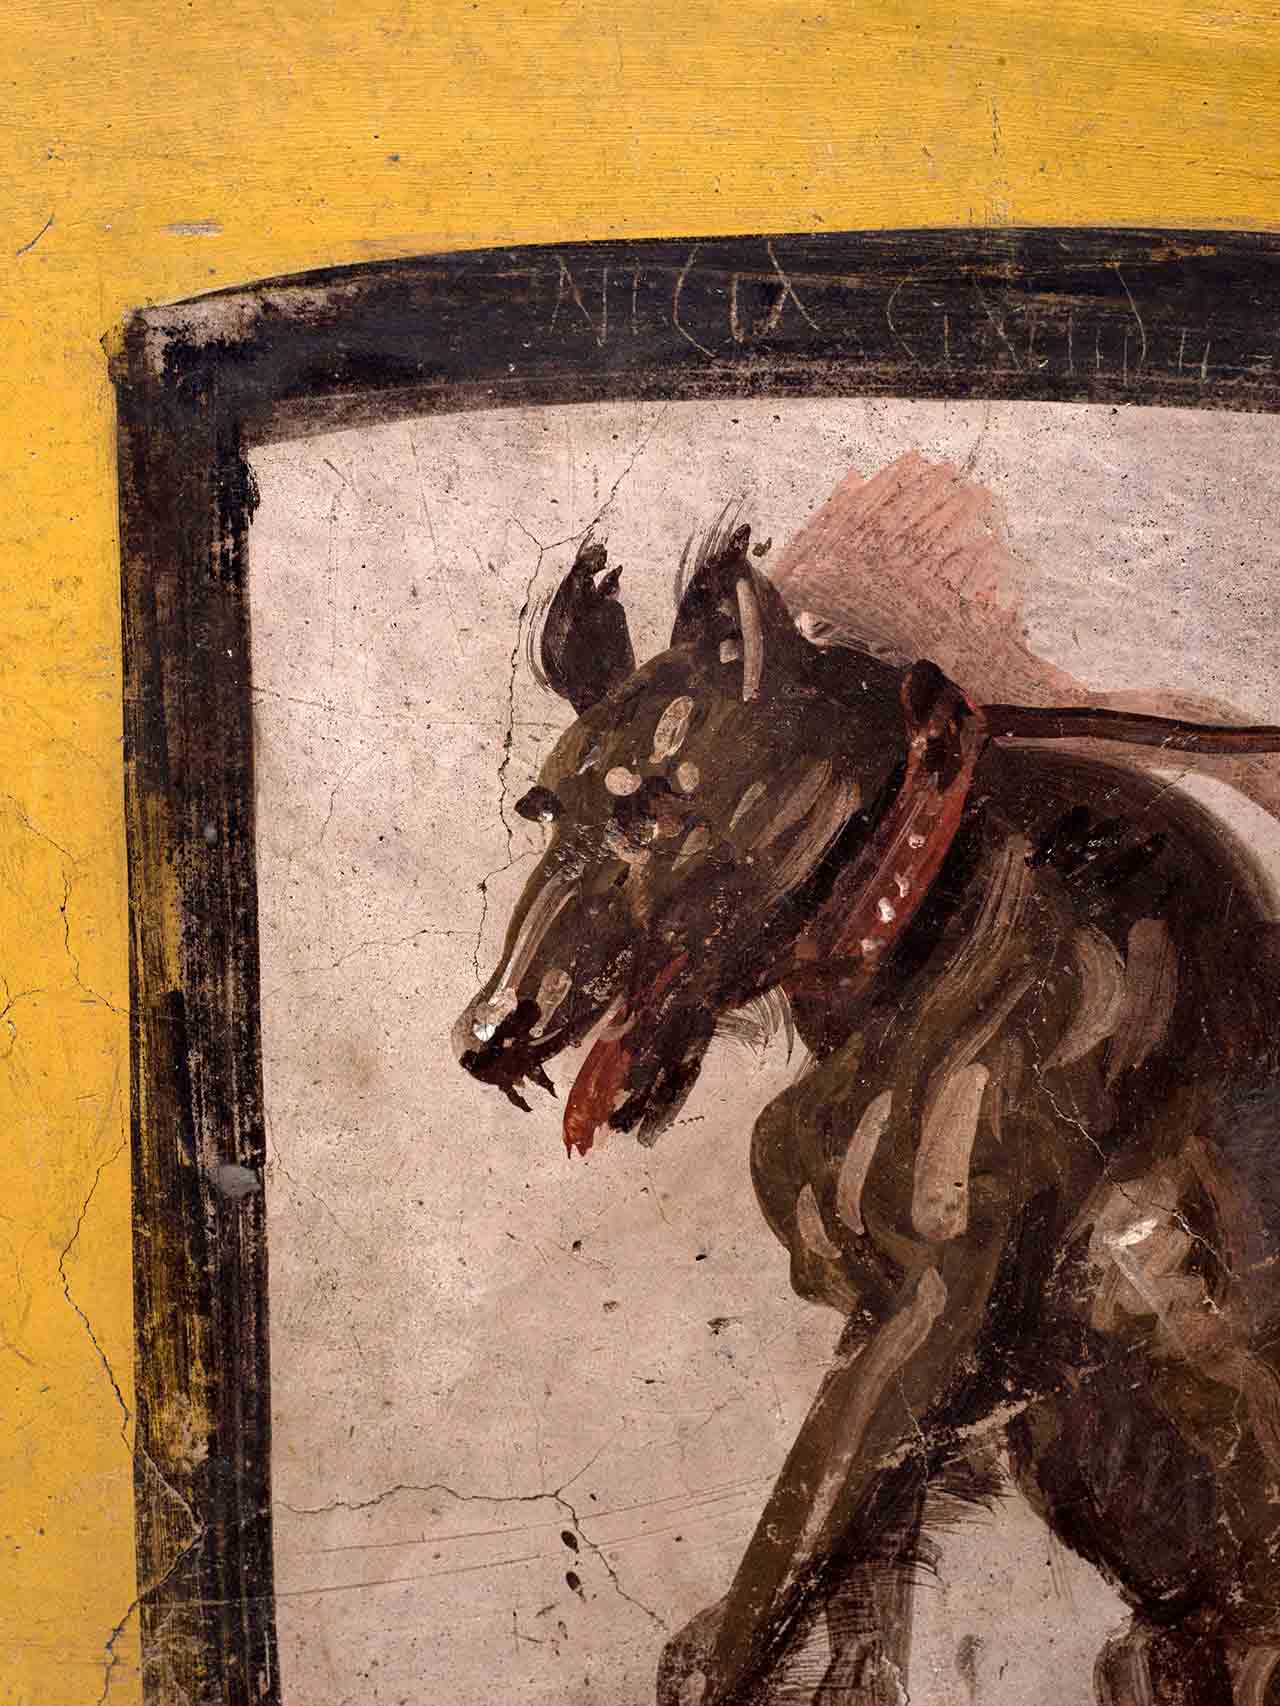 An image of a dog with homophobic graffiti written in white across the top border found at the soon to reopen Pompeii food stall. (Pompeii Archaeological Park)